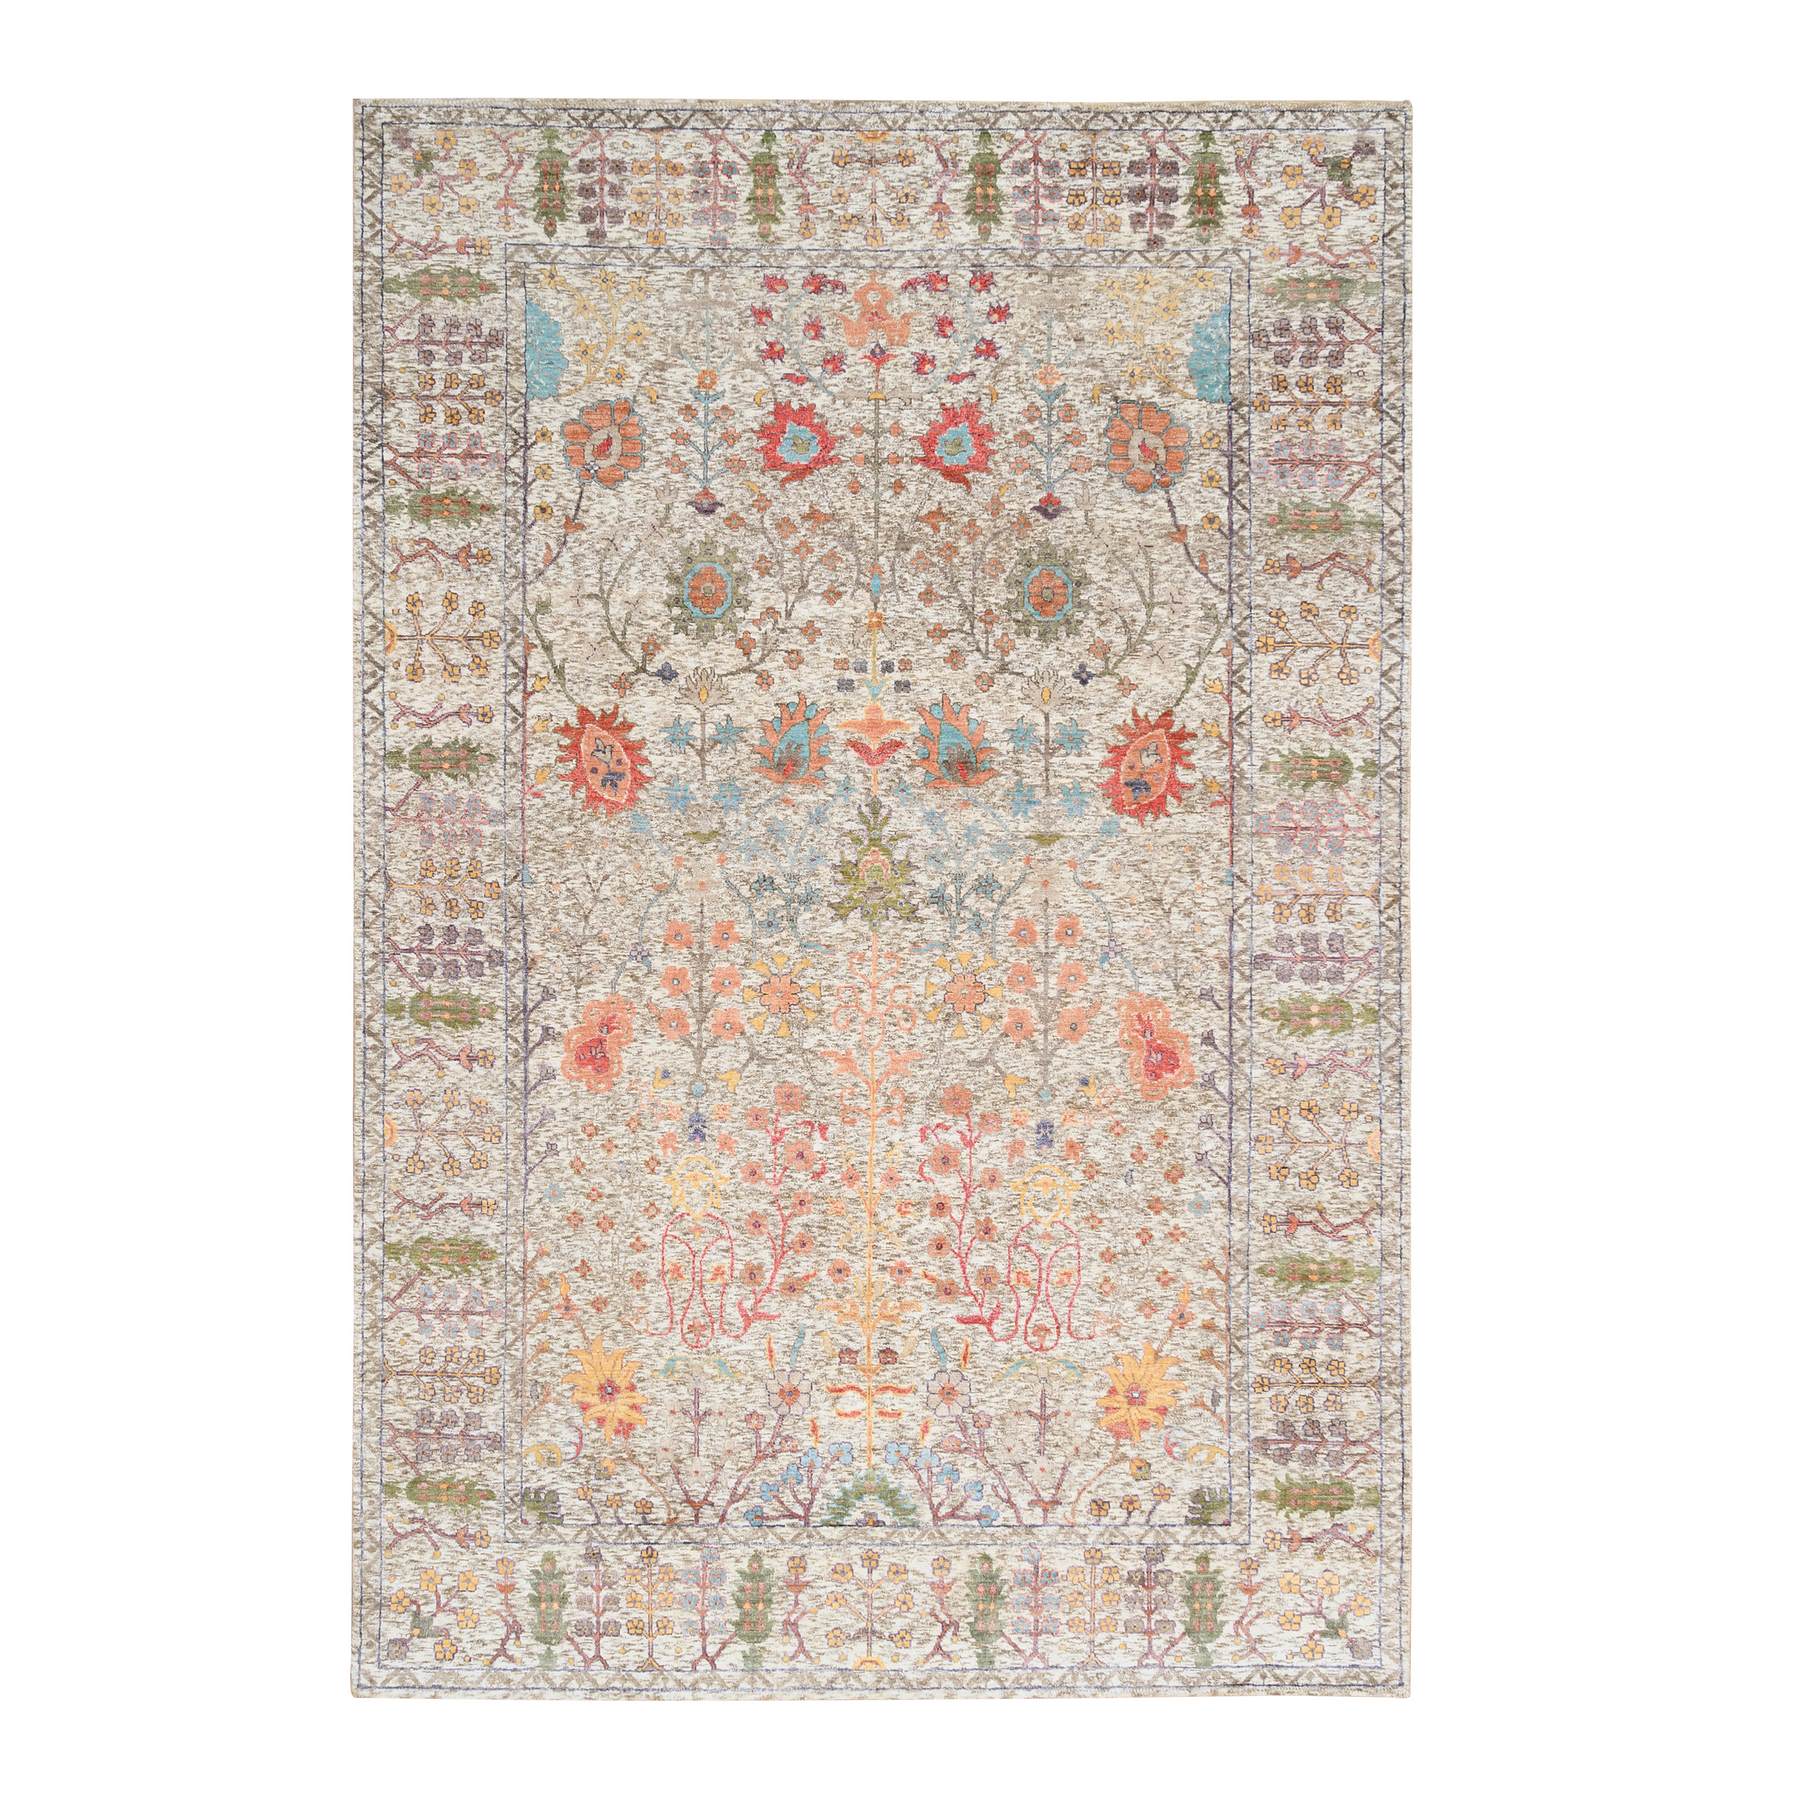  Silk Hand-Knotted Area Rug 6'1